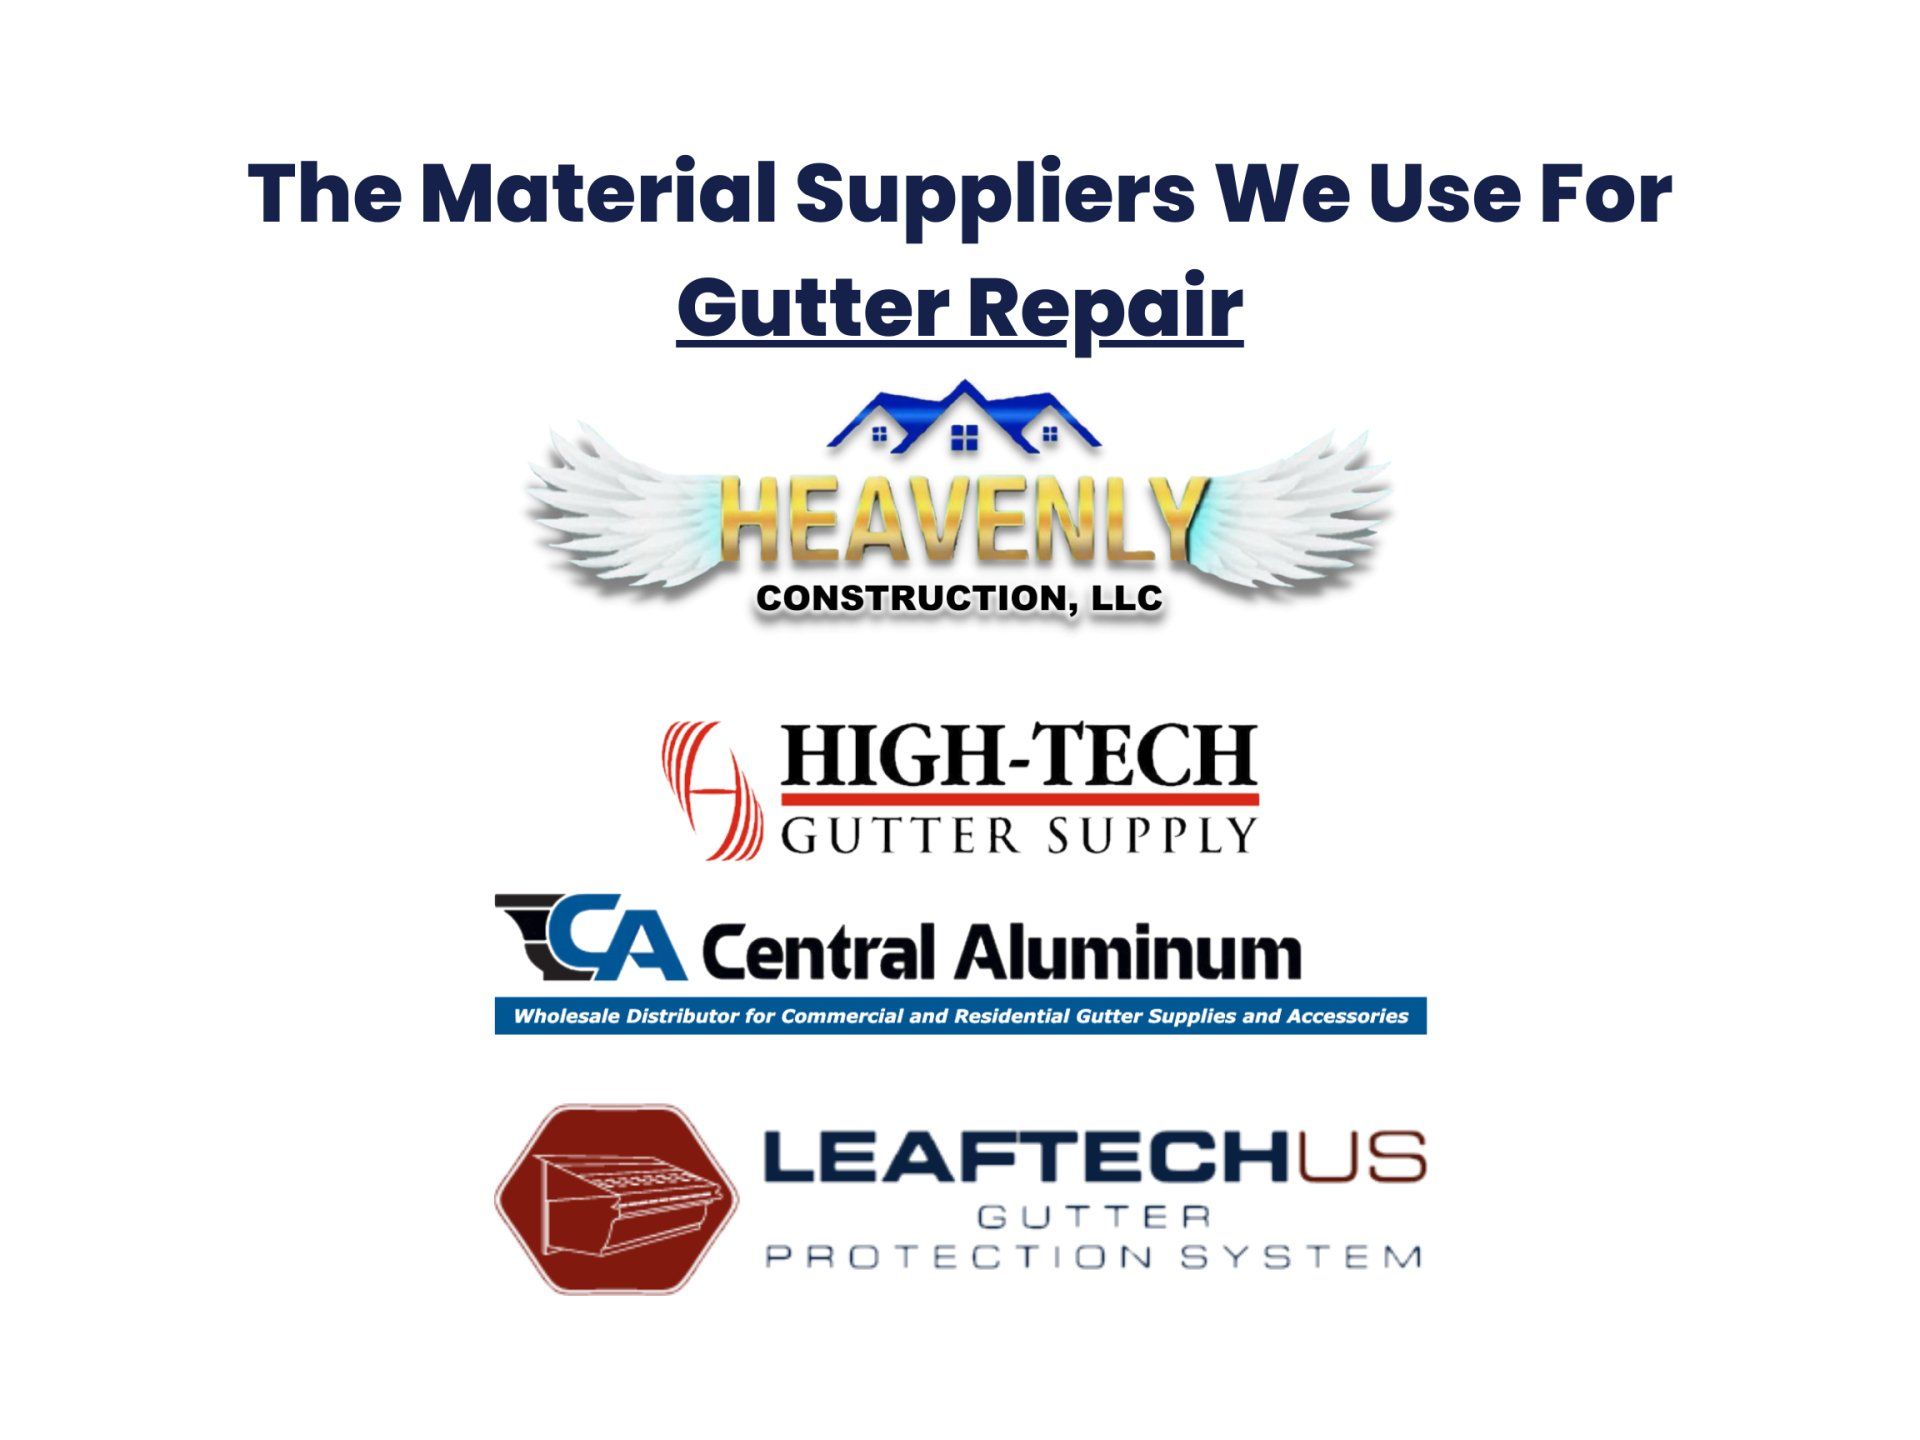 High-Tech Gutter Supply, Central Aluminum, and LEAFTECH US logos.